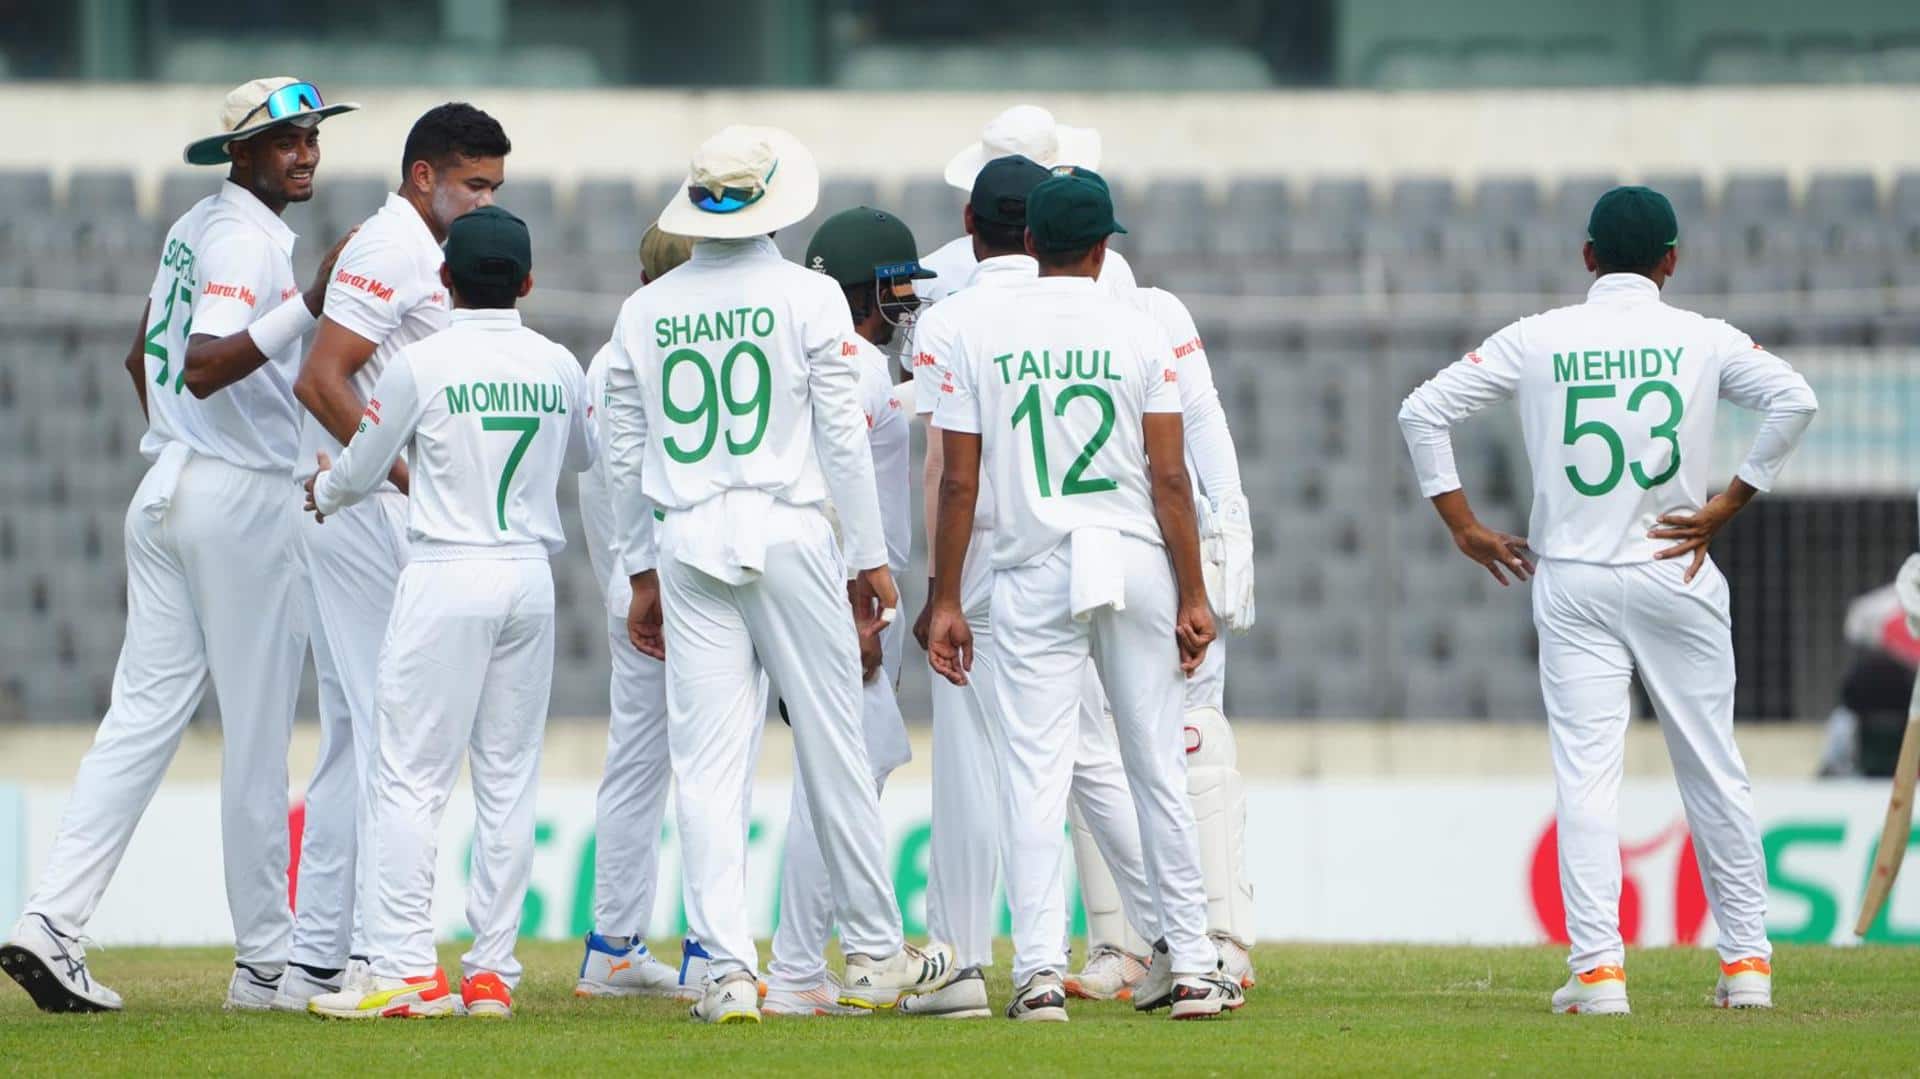 Bangladesh humble Afghanistan with record win in one-off Test